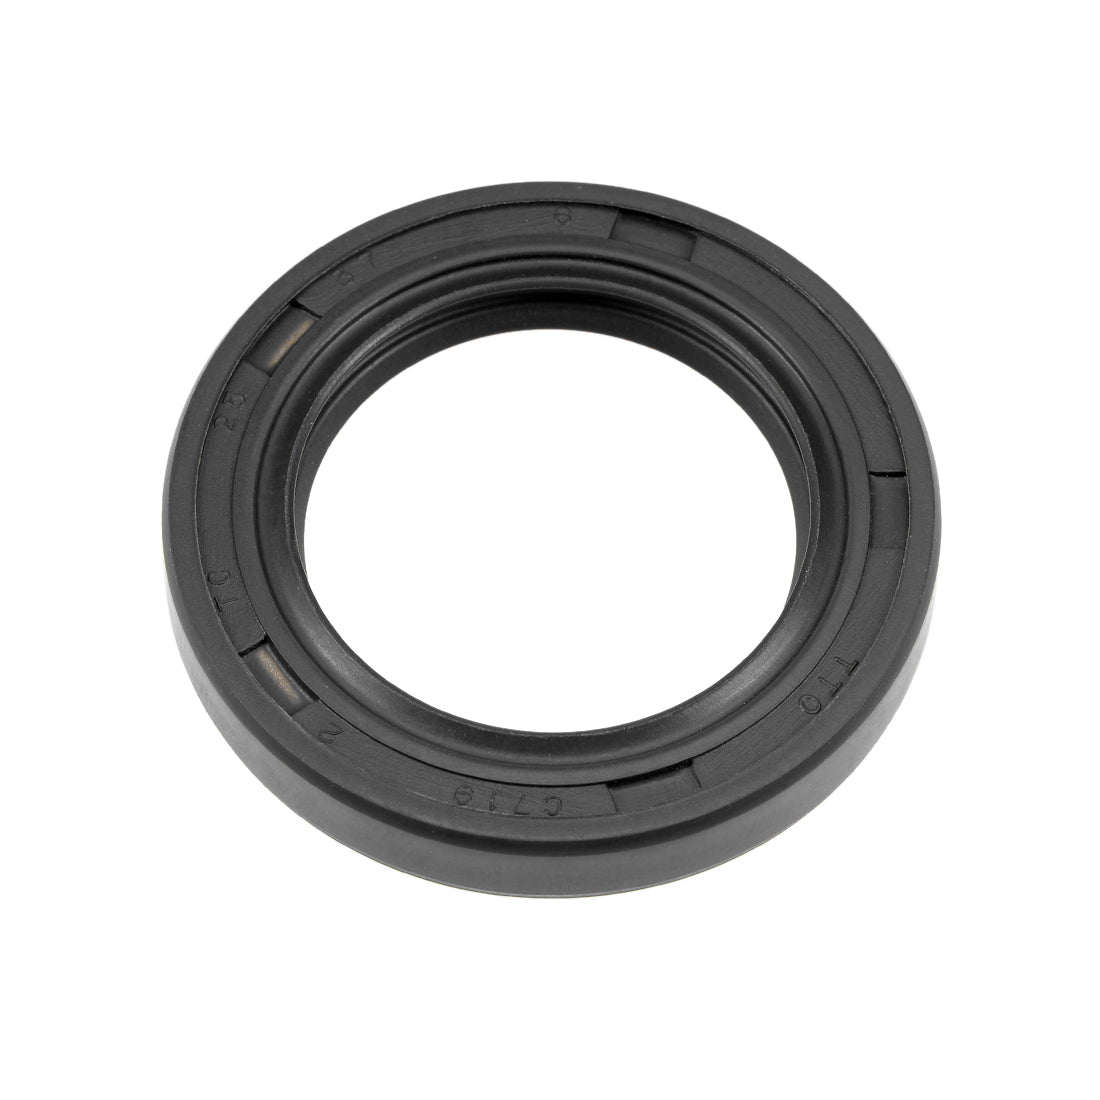 uxcell Uxcell Oil Seals, TC Inner Diameter, Nitrile Rubber Cover Double Lips 1pcs